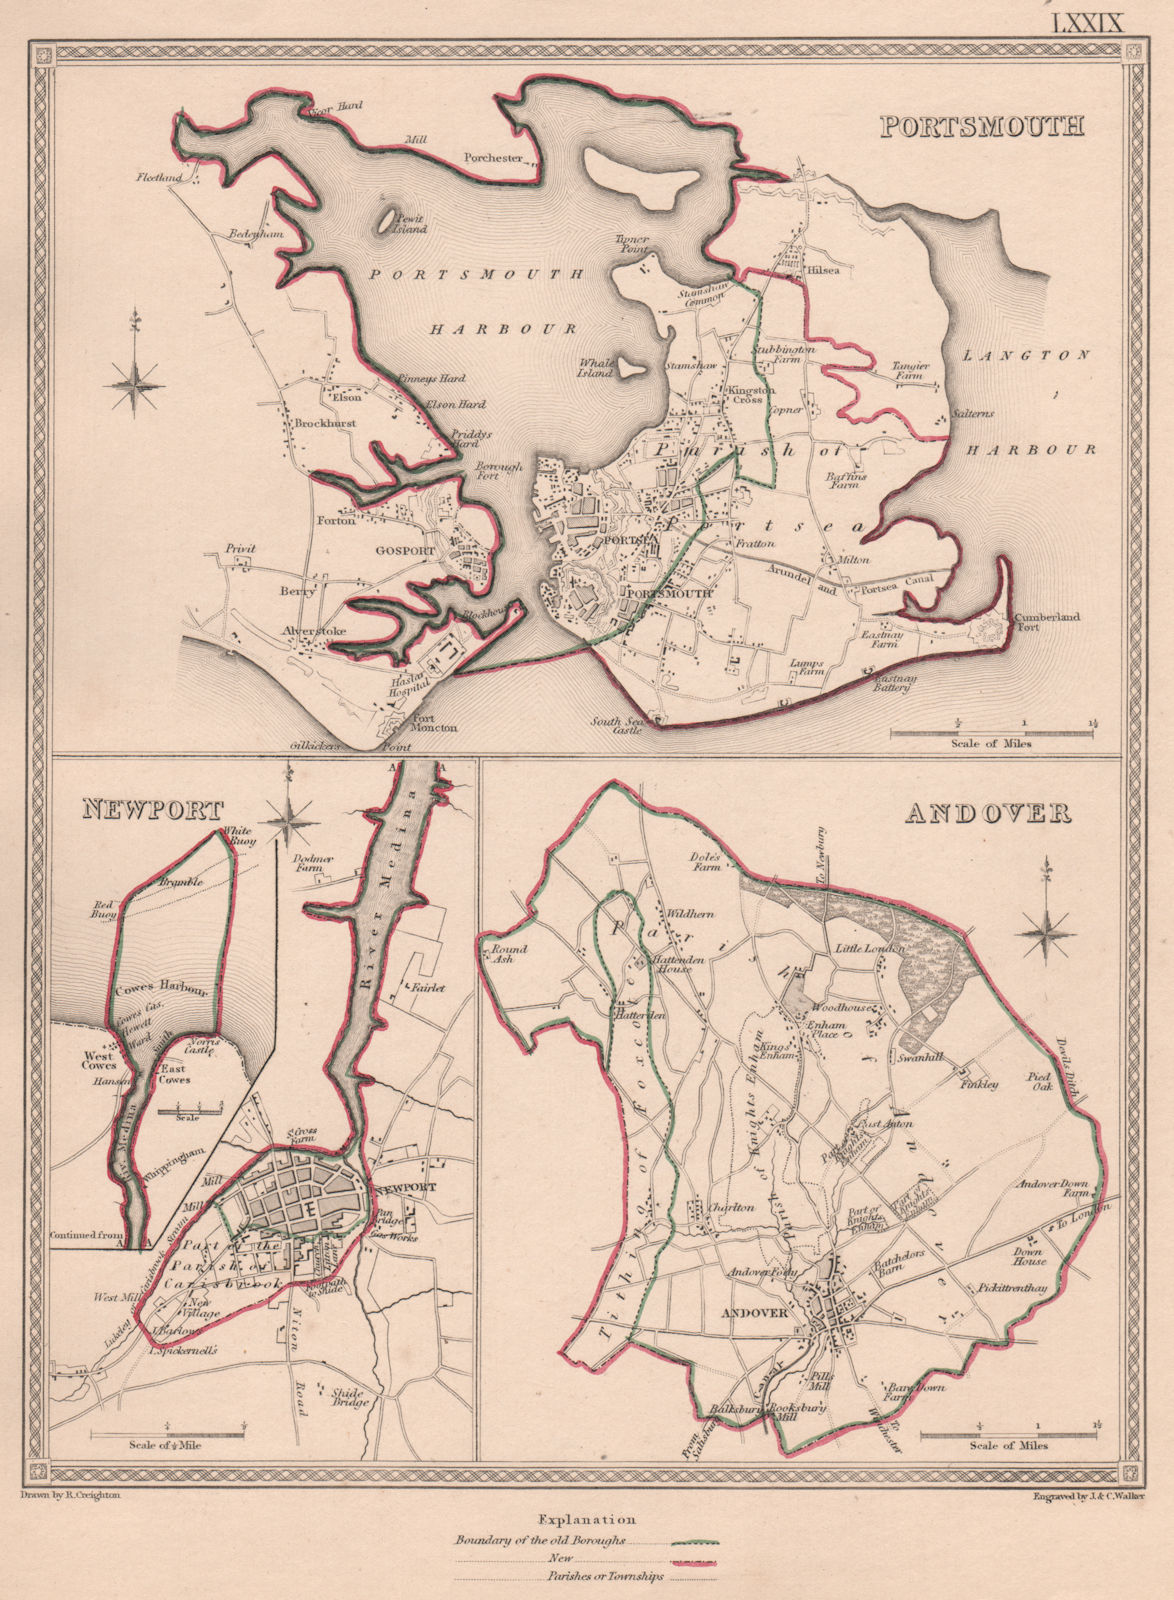 HAMPSHIRE TOWNS. Portsmouth Newport Andover plans. CREIGHTON/WALKER 1835 map